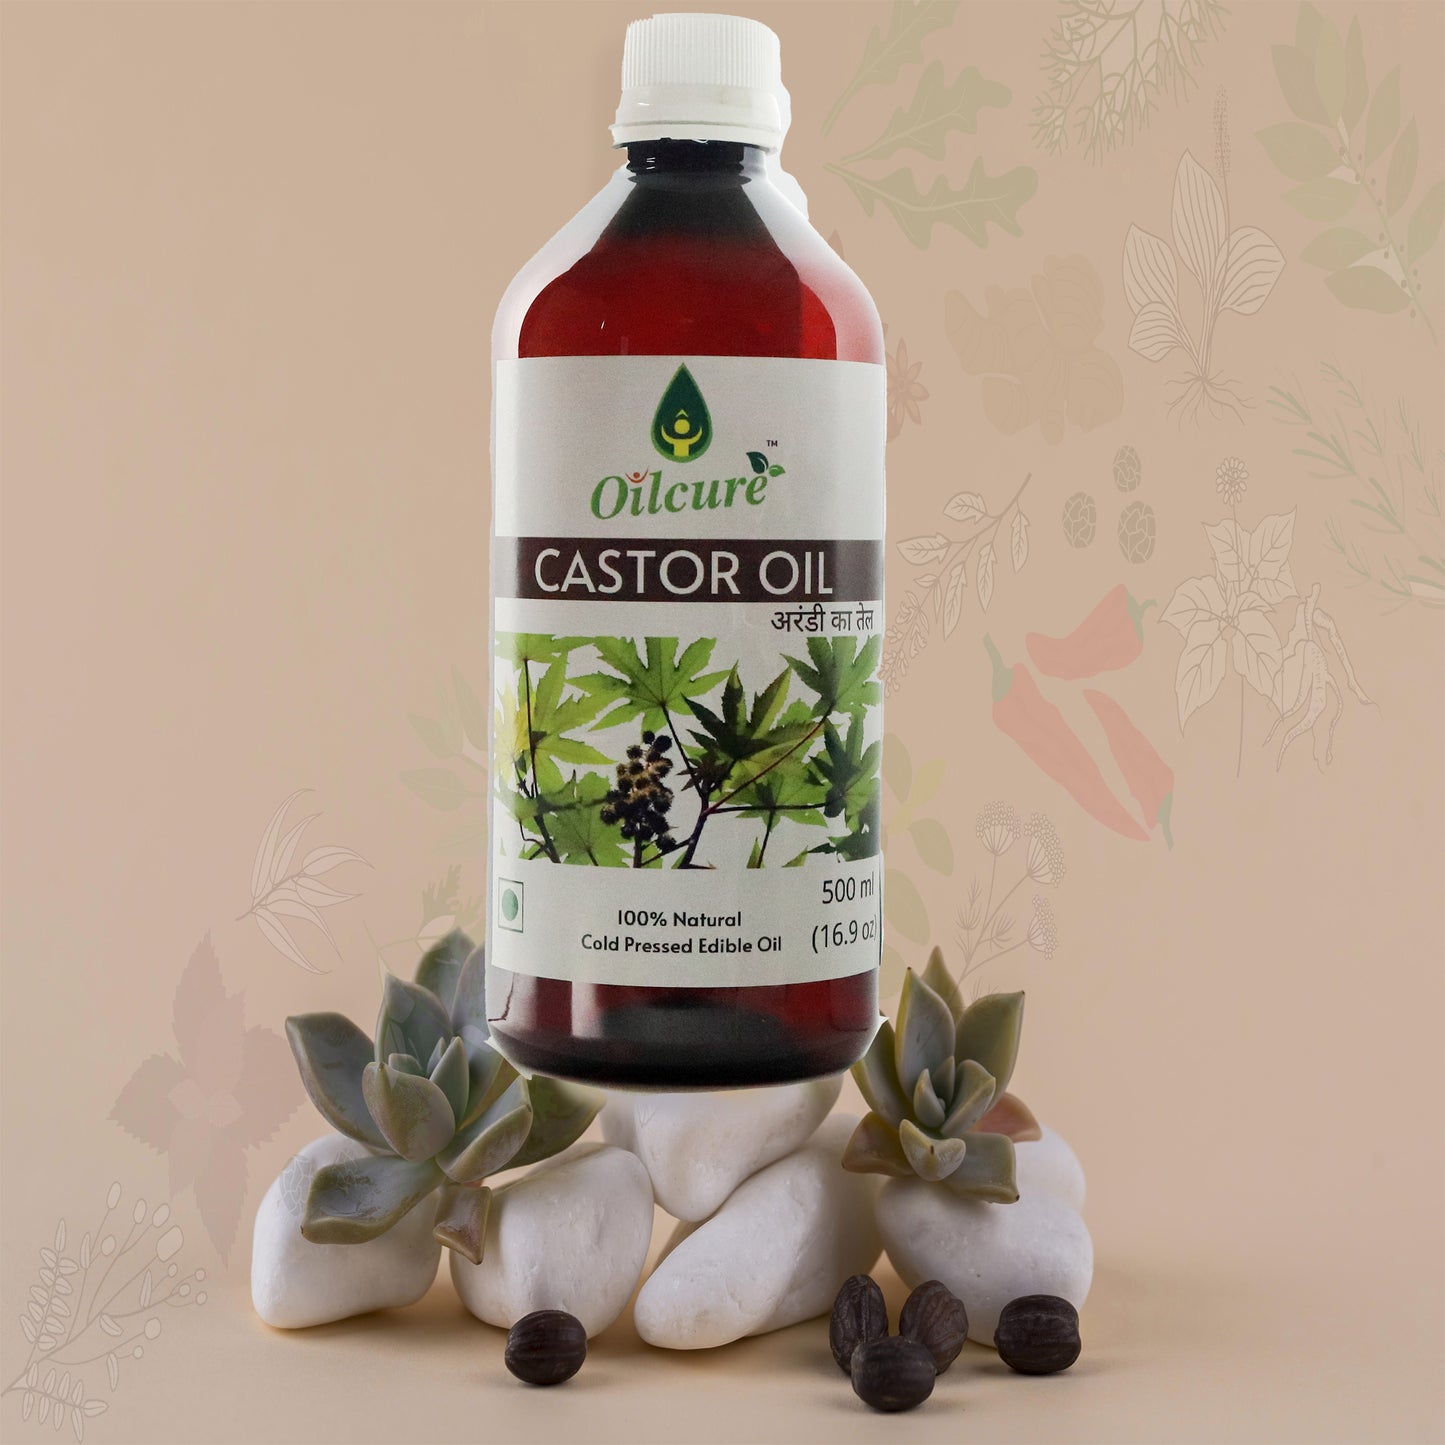 When using cold-pressed castor oil, it is important to choose a high-quality, pure oil